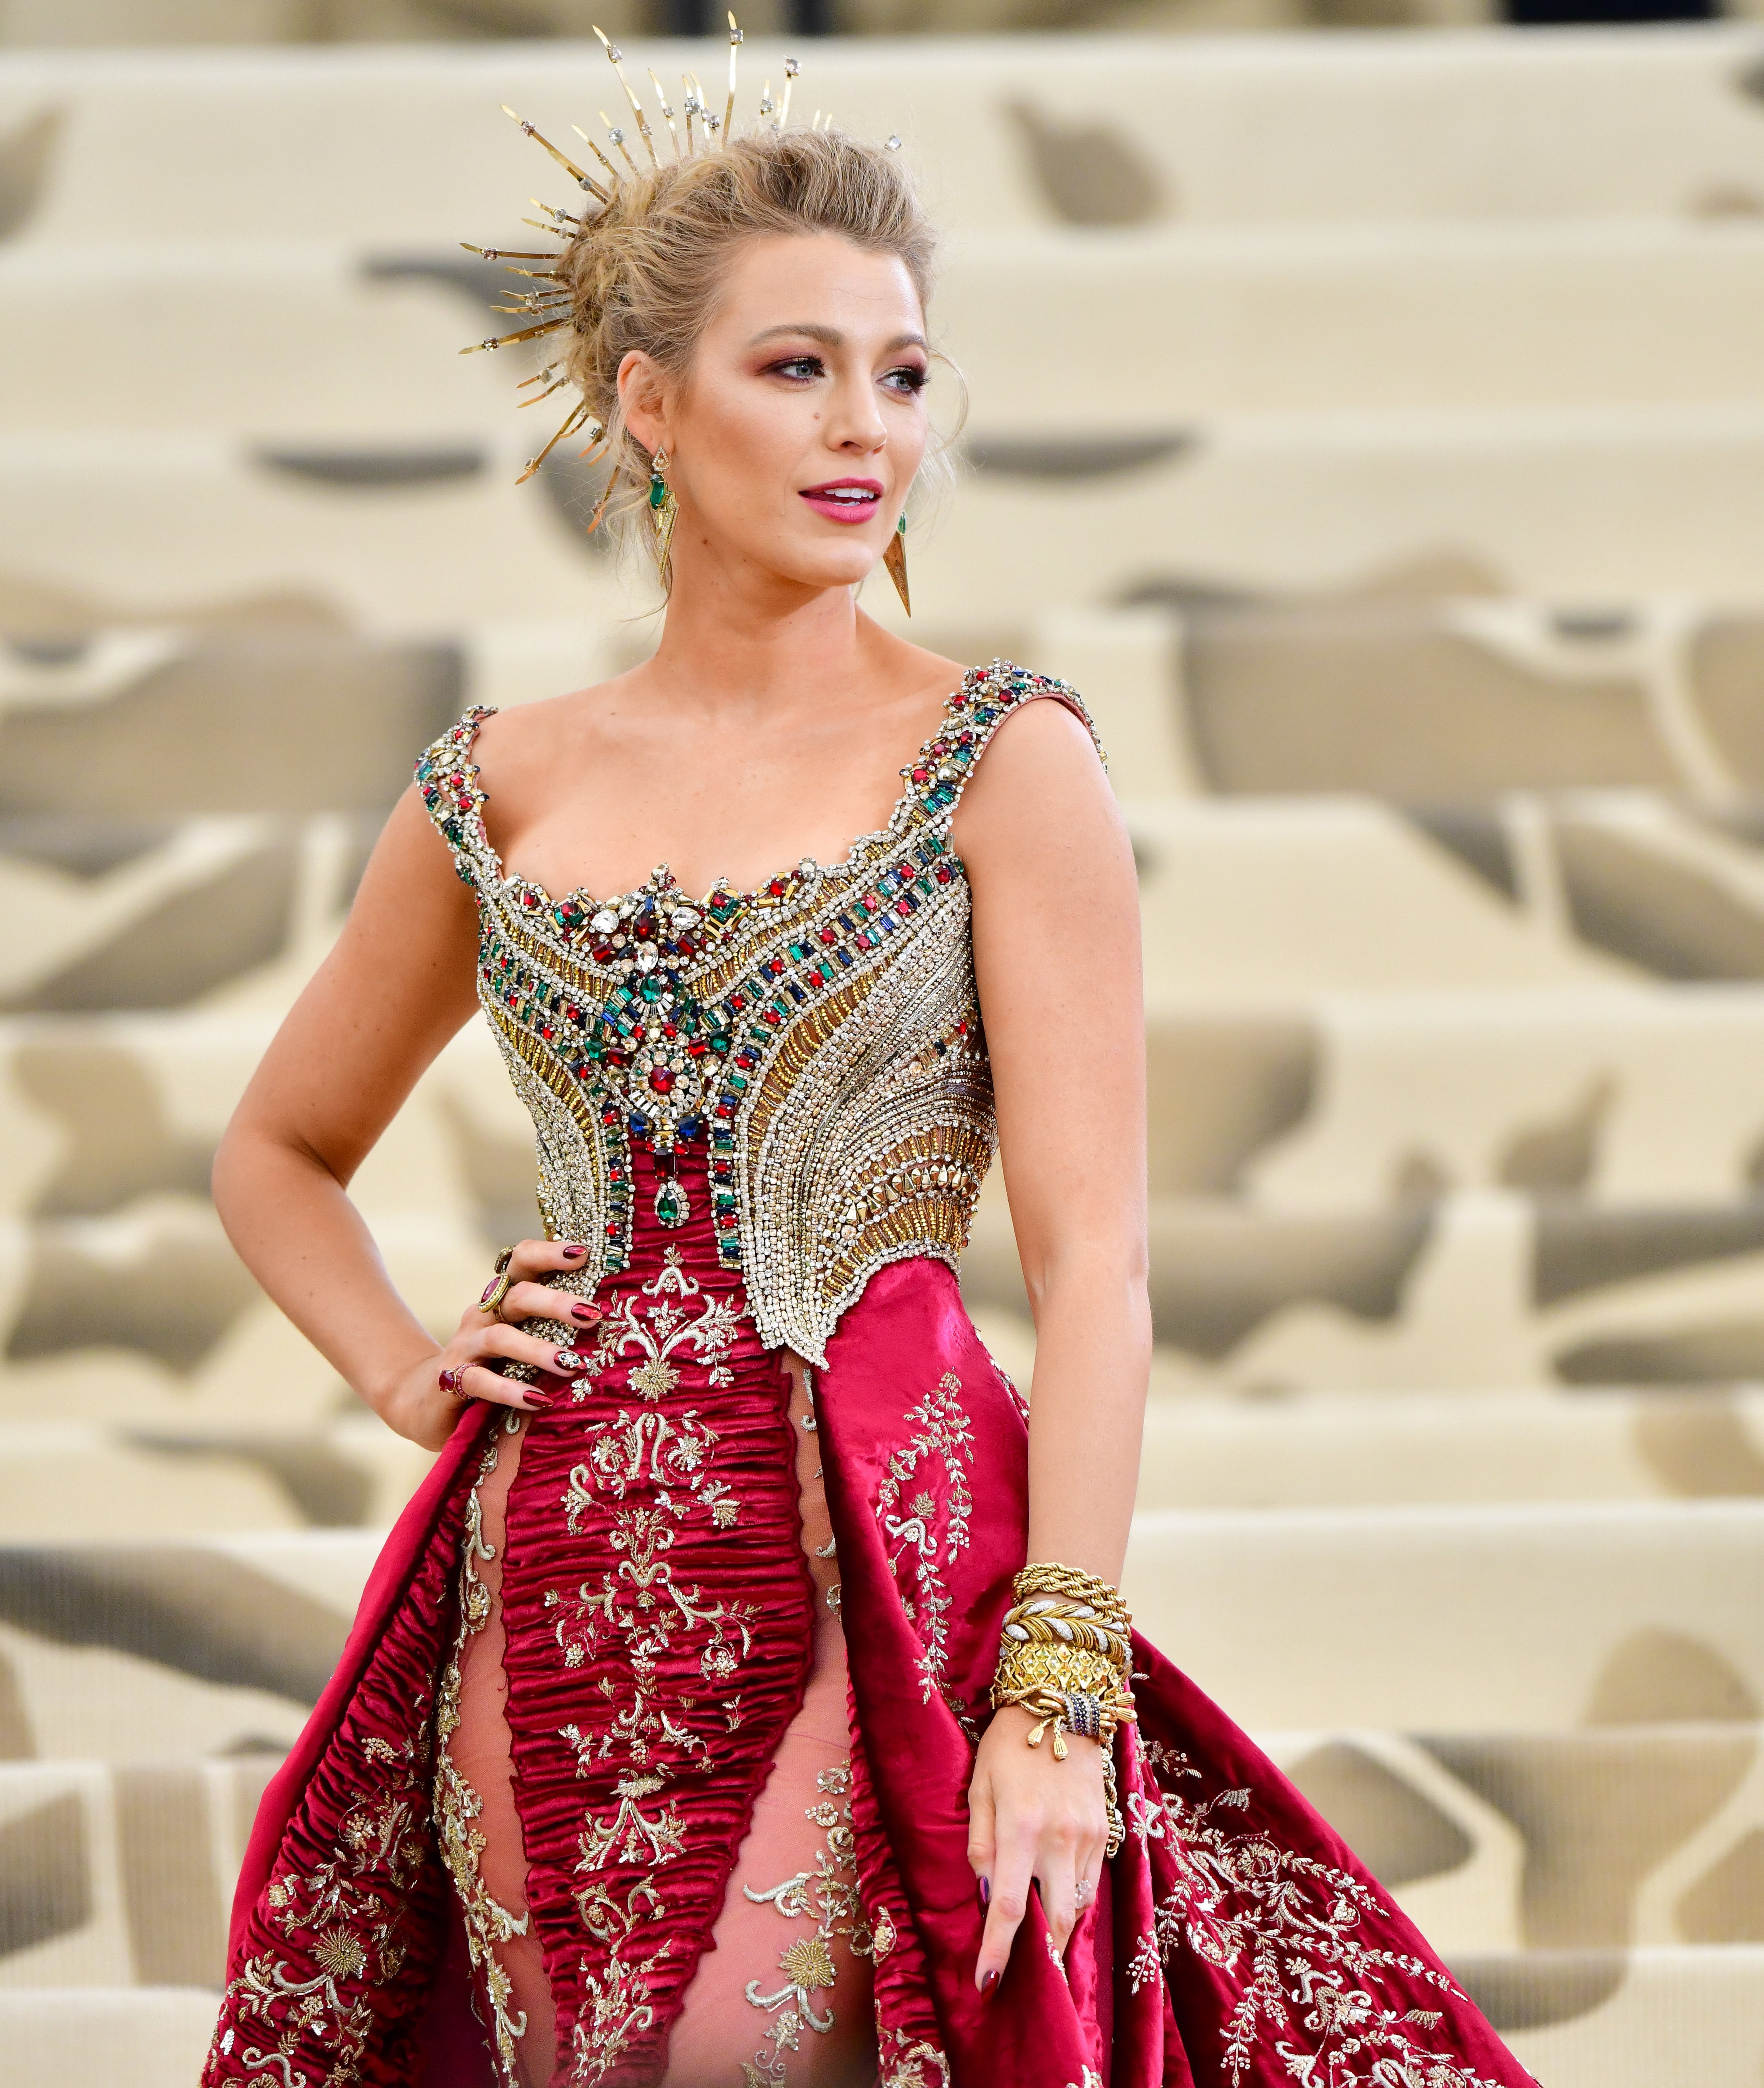 Photos from Blake Lively's Met Gala Looks